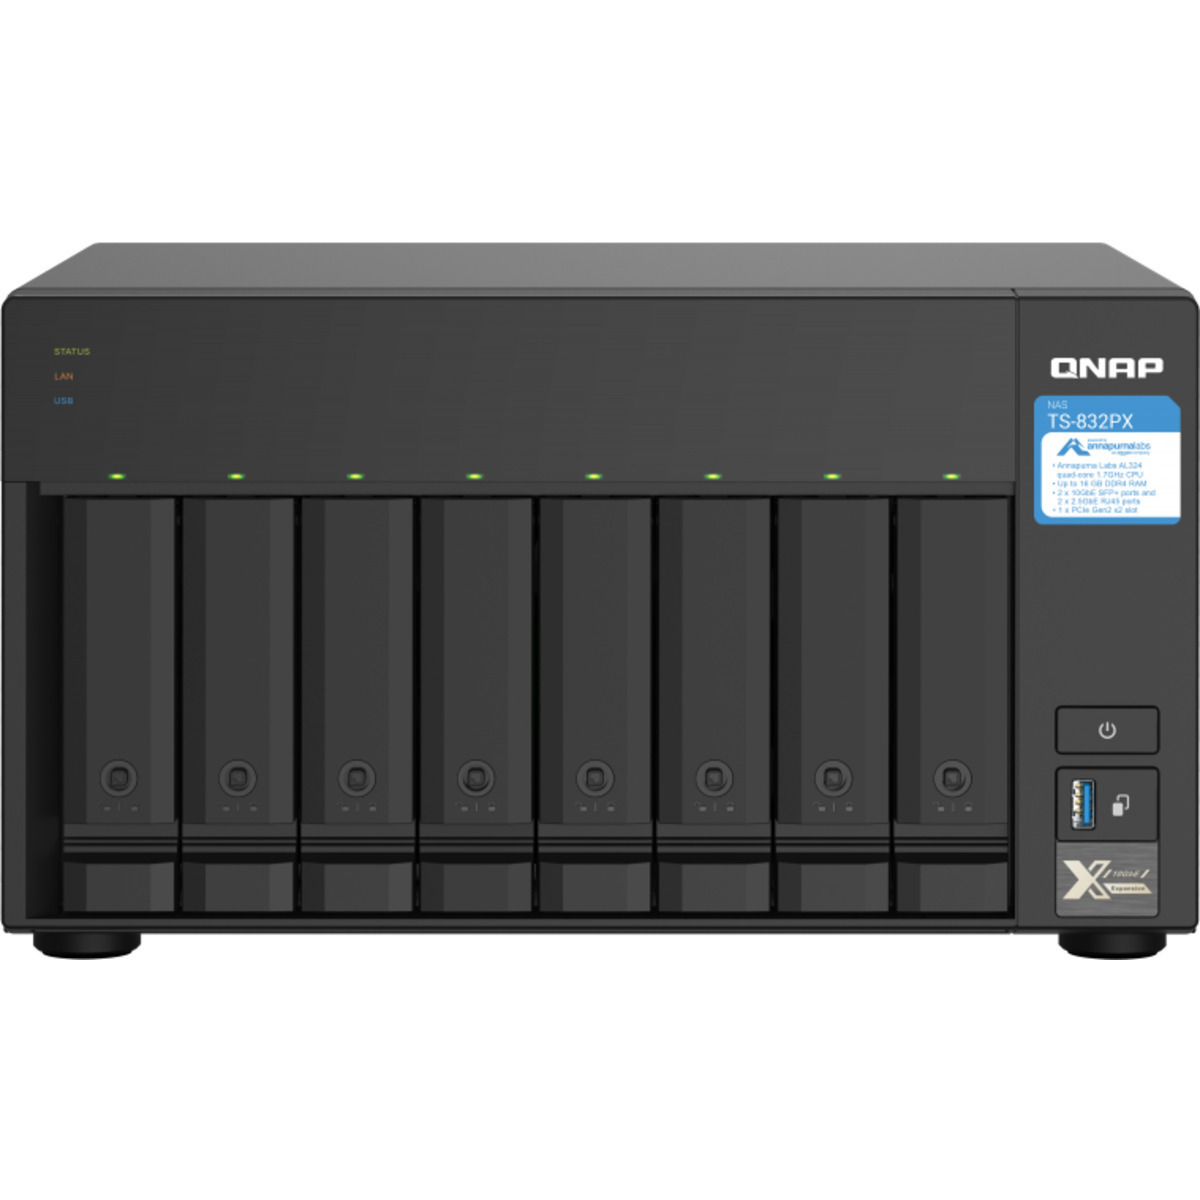 QNAP TS-832PX 64tb 8-Bay Desktop Multimedia / Power User / Business NAS - Network Attached Storage Device 8x8tb Seagate EXOS 7E10 ST8000NM017B 3.5 7200rpm SATA 6Gb/s HDD ENTERPRISE Class Drives Installed - Burn-In Tested - FREE RAM UPGRADE TS-832PX